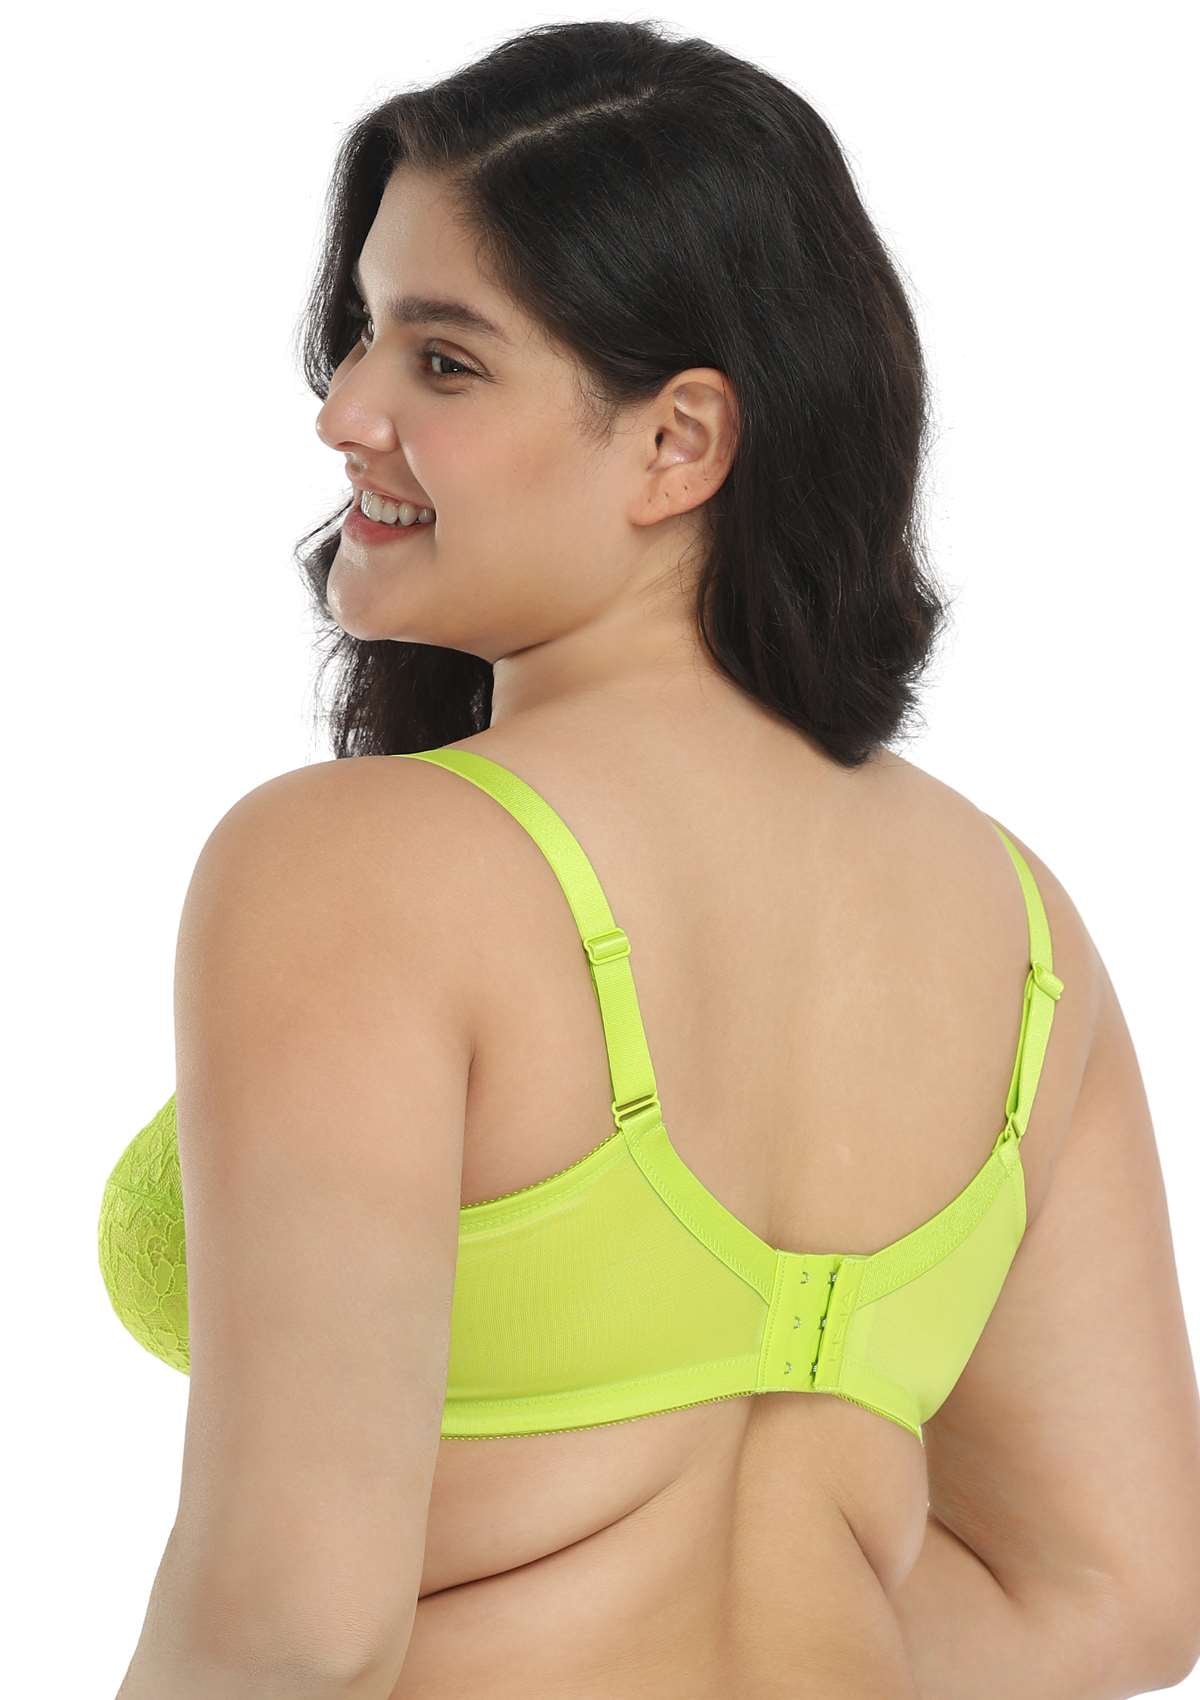 HSIA Enchante Full Cup Minimizing Bra: Supportive Unlined Lace Bra - Lime Green / 44 / DDD/F